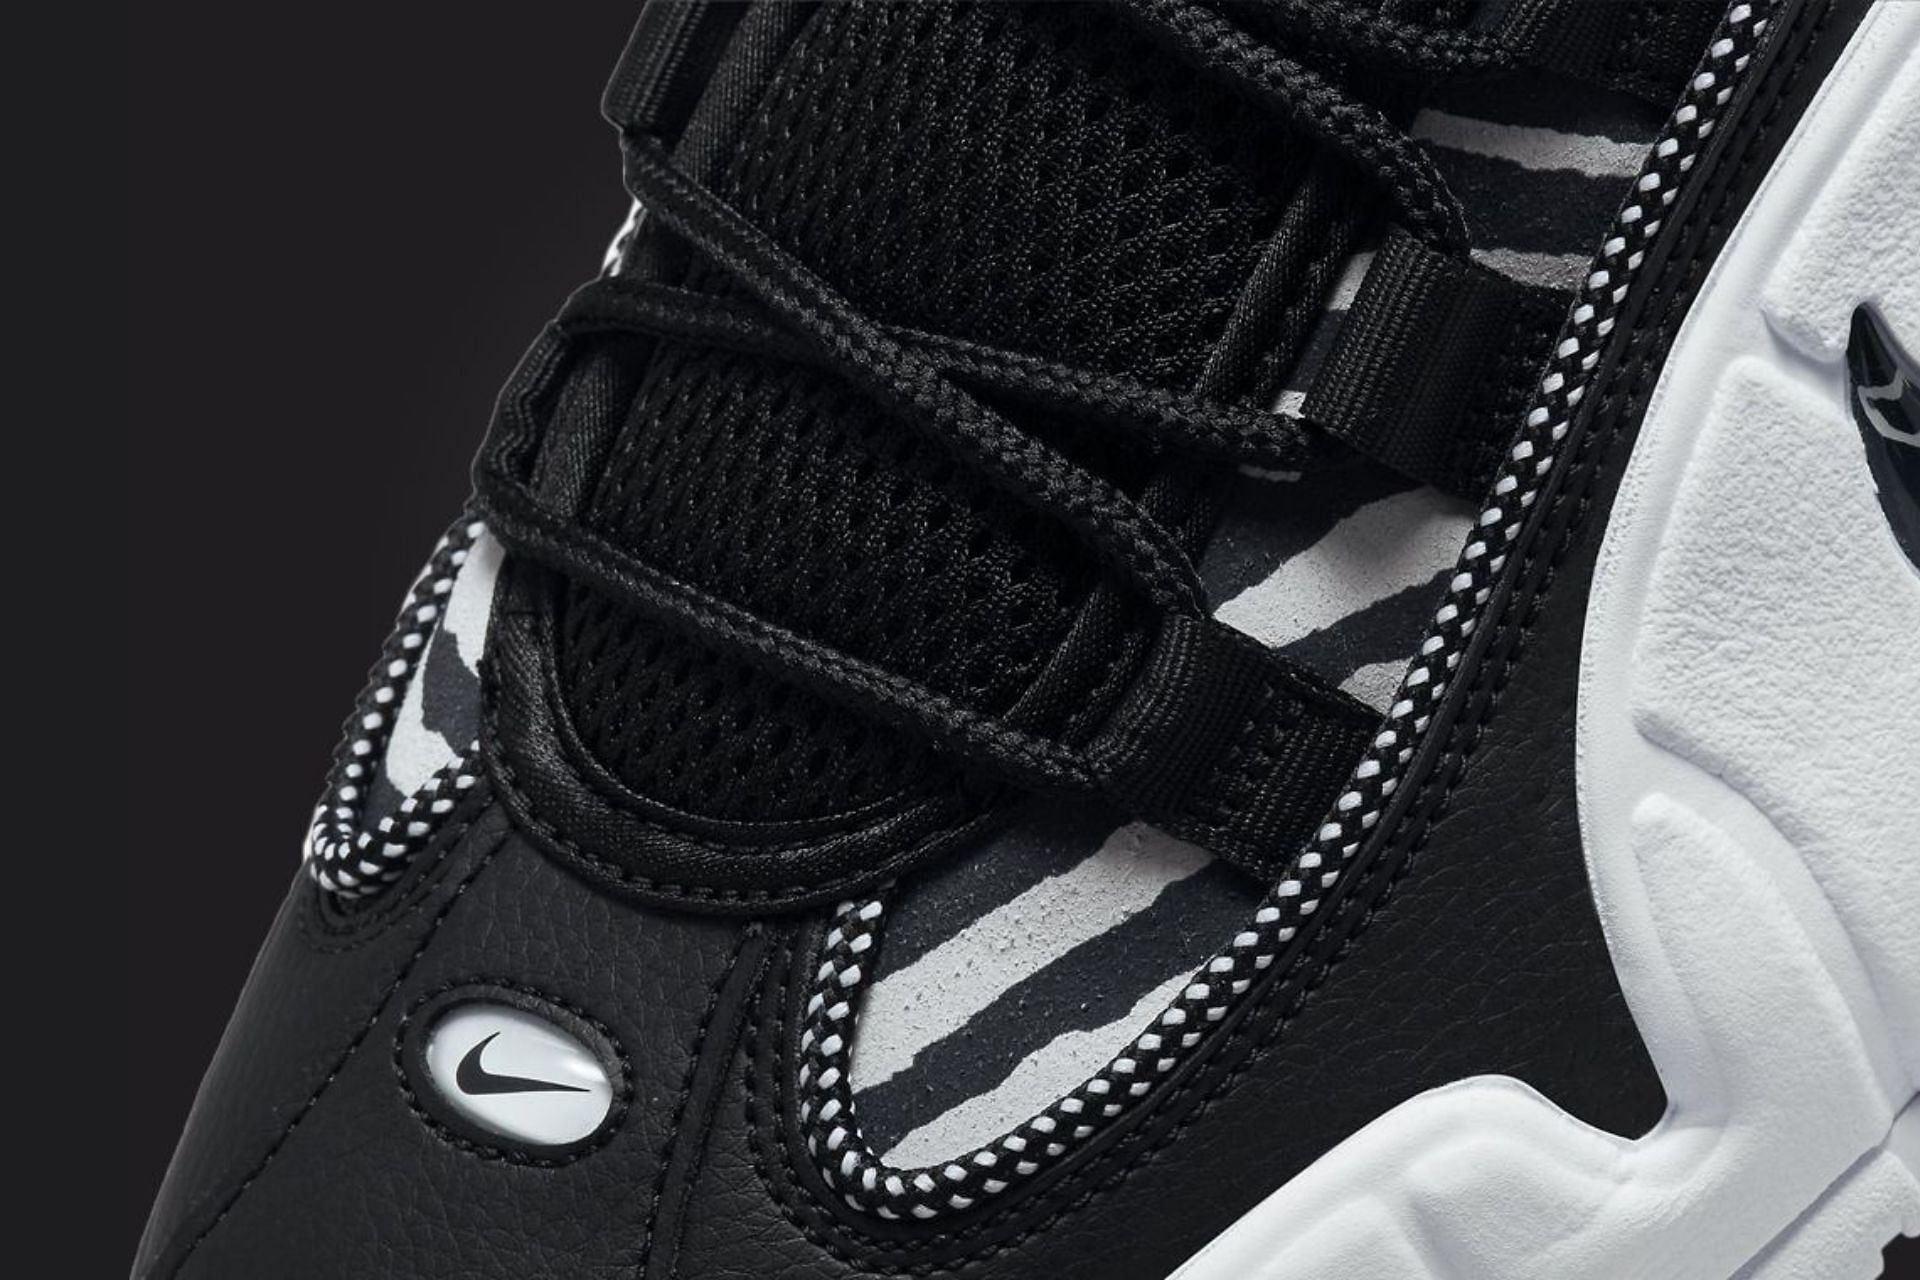 Here&#039;s a detailed look at the meshed tongue flaps of the Air Max Penny 1 &quot;Tiger Stripes&quot; sneakers (Image via Nike)